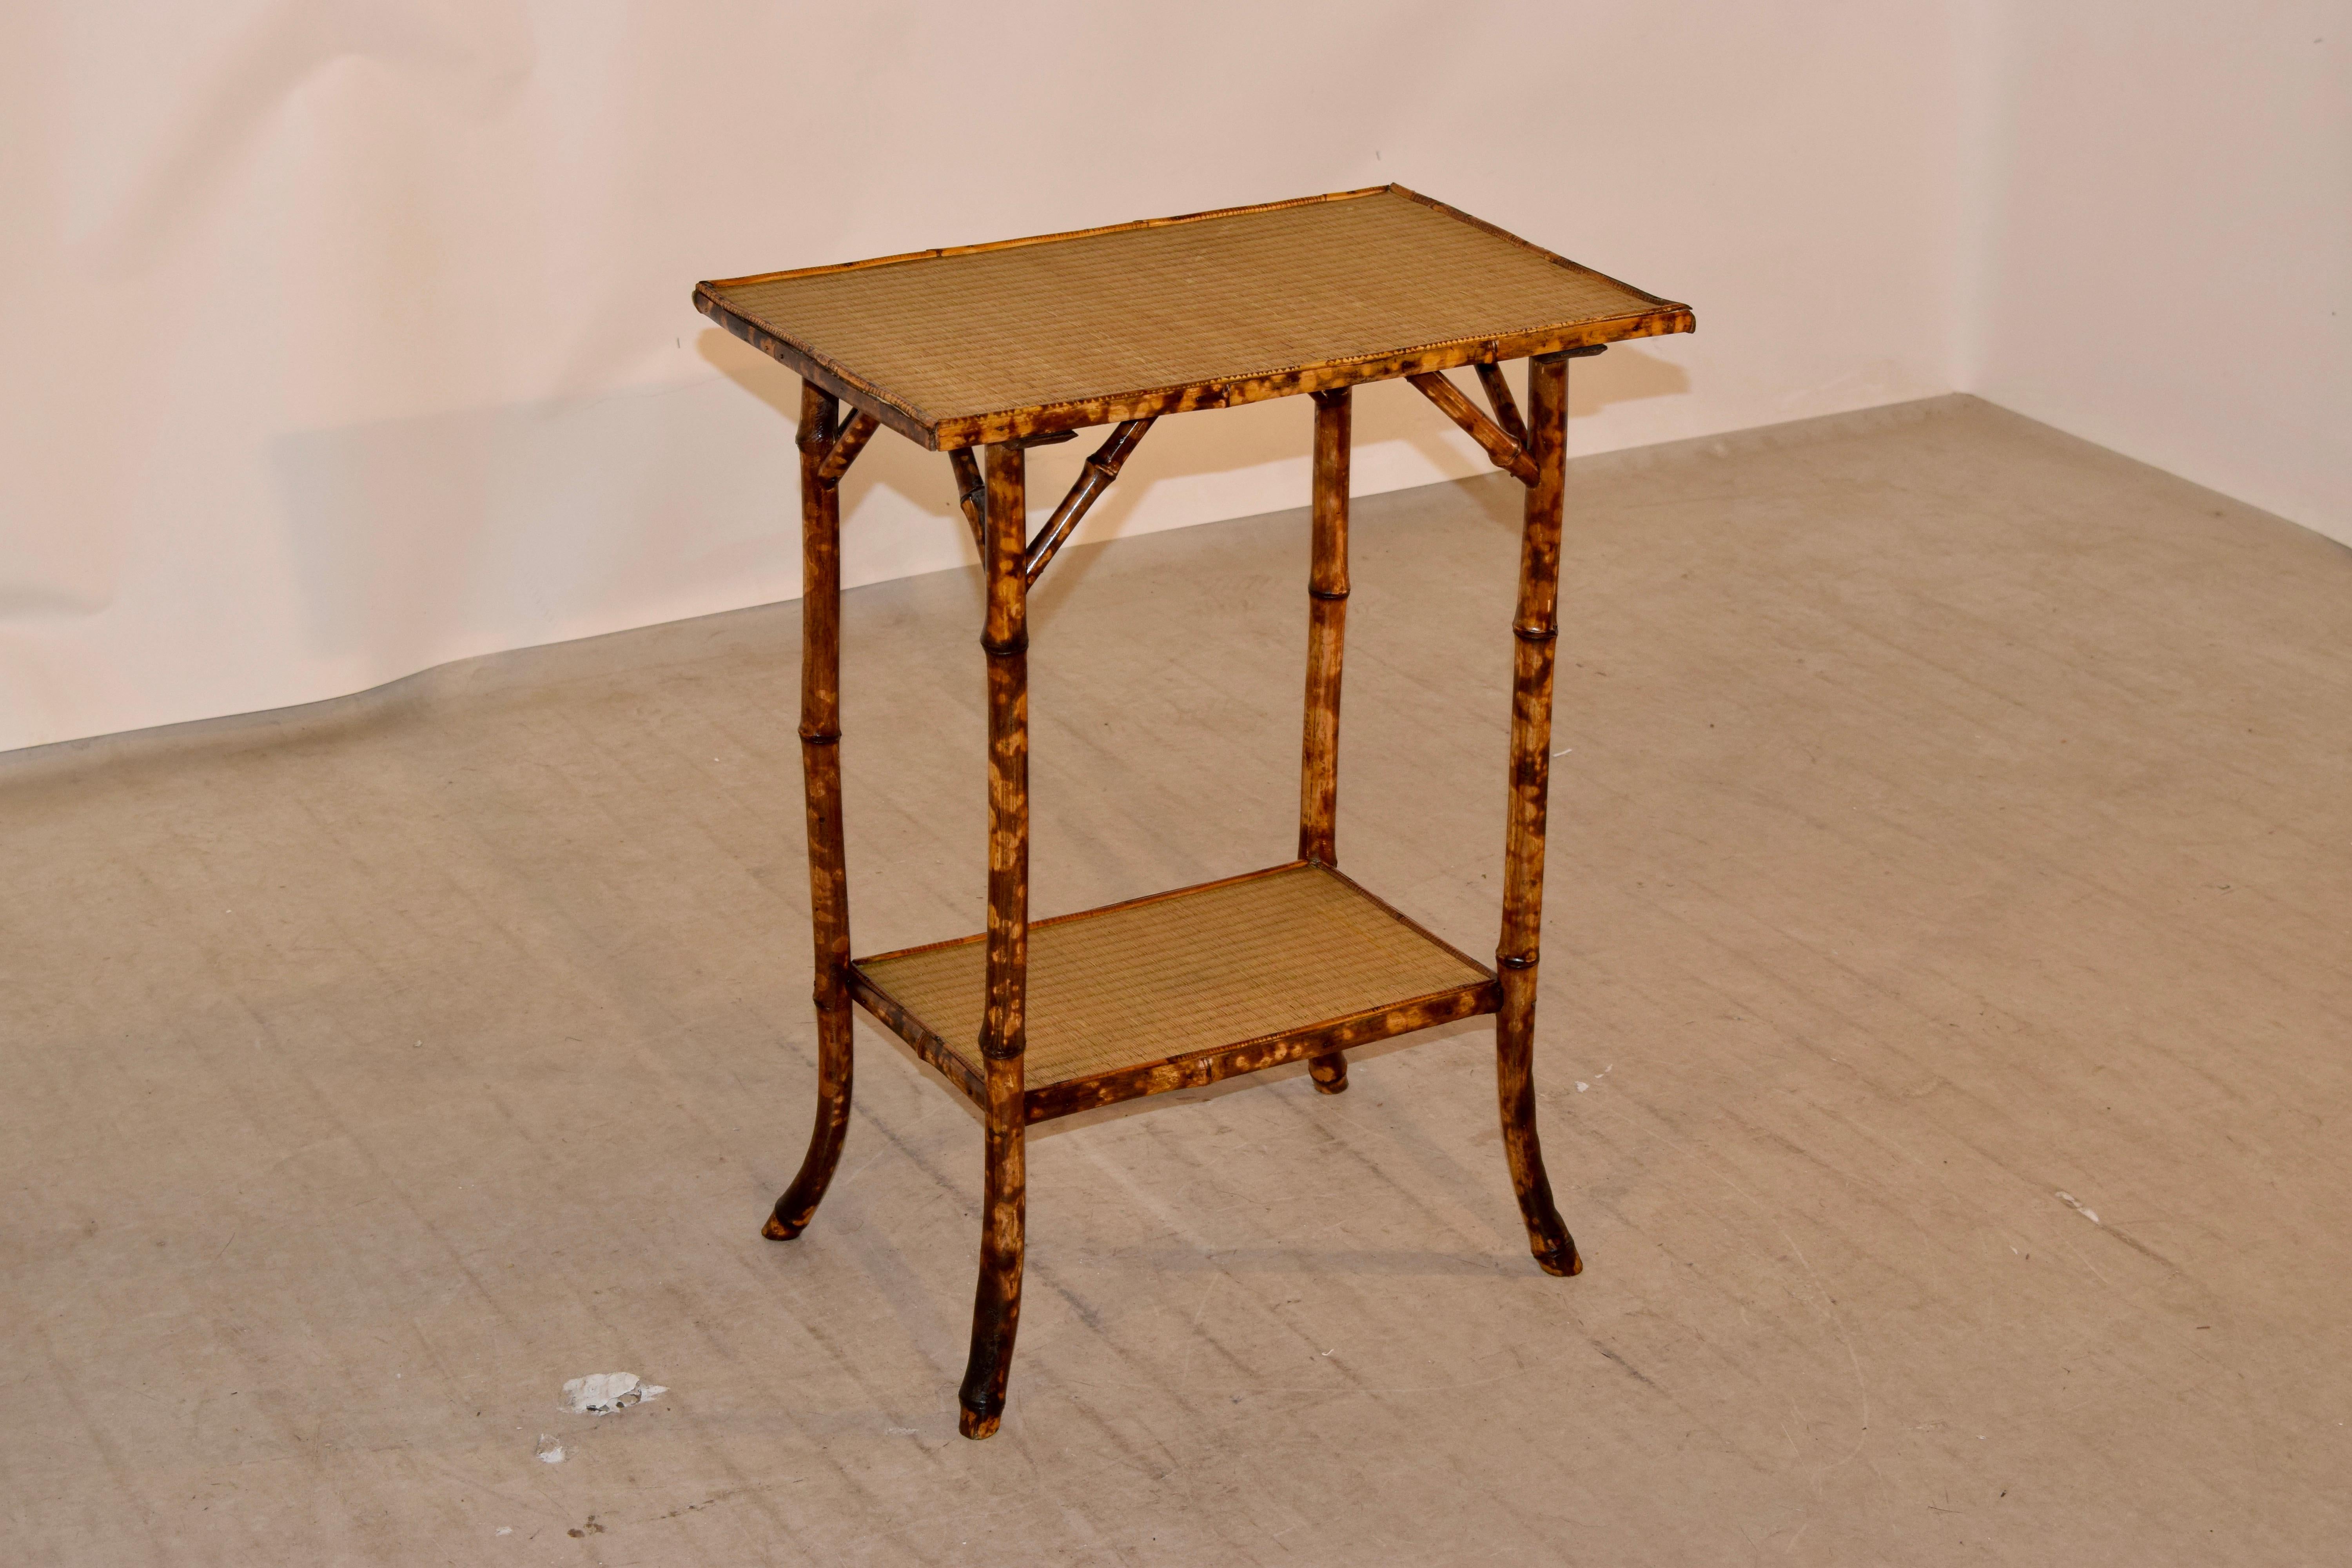 19th century tortoise bamboo side table from France with a rush covered top and lower shelf. The table is supported on splayed legs.